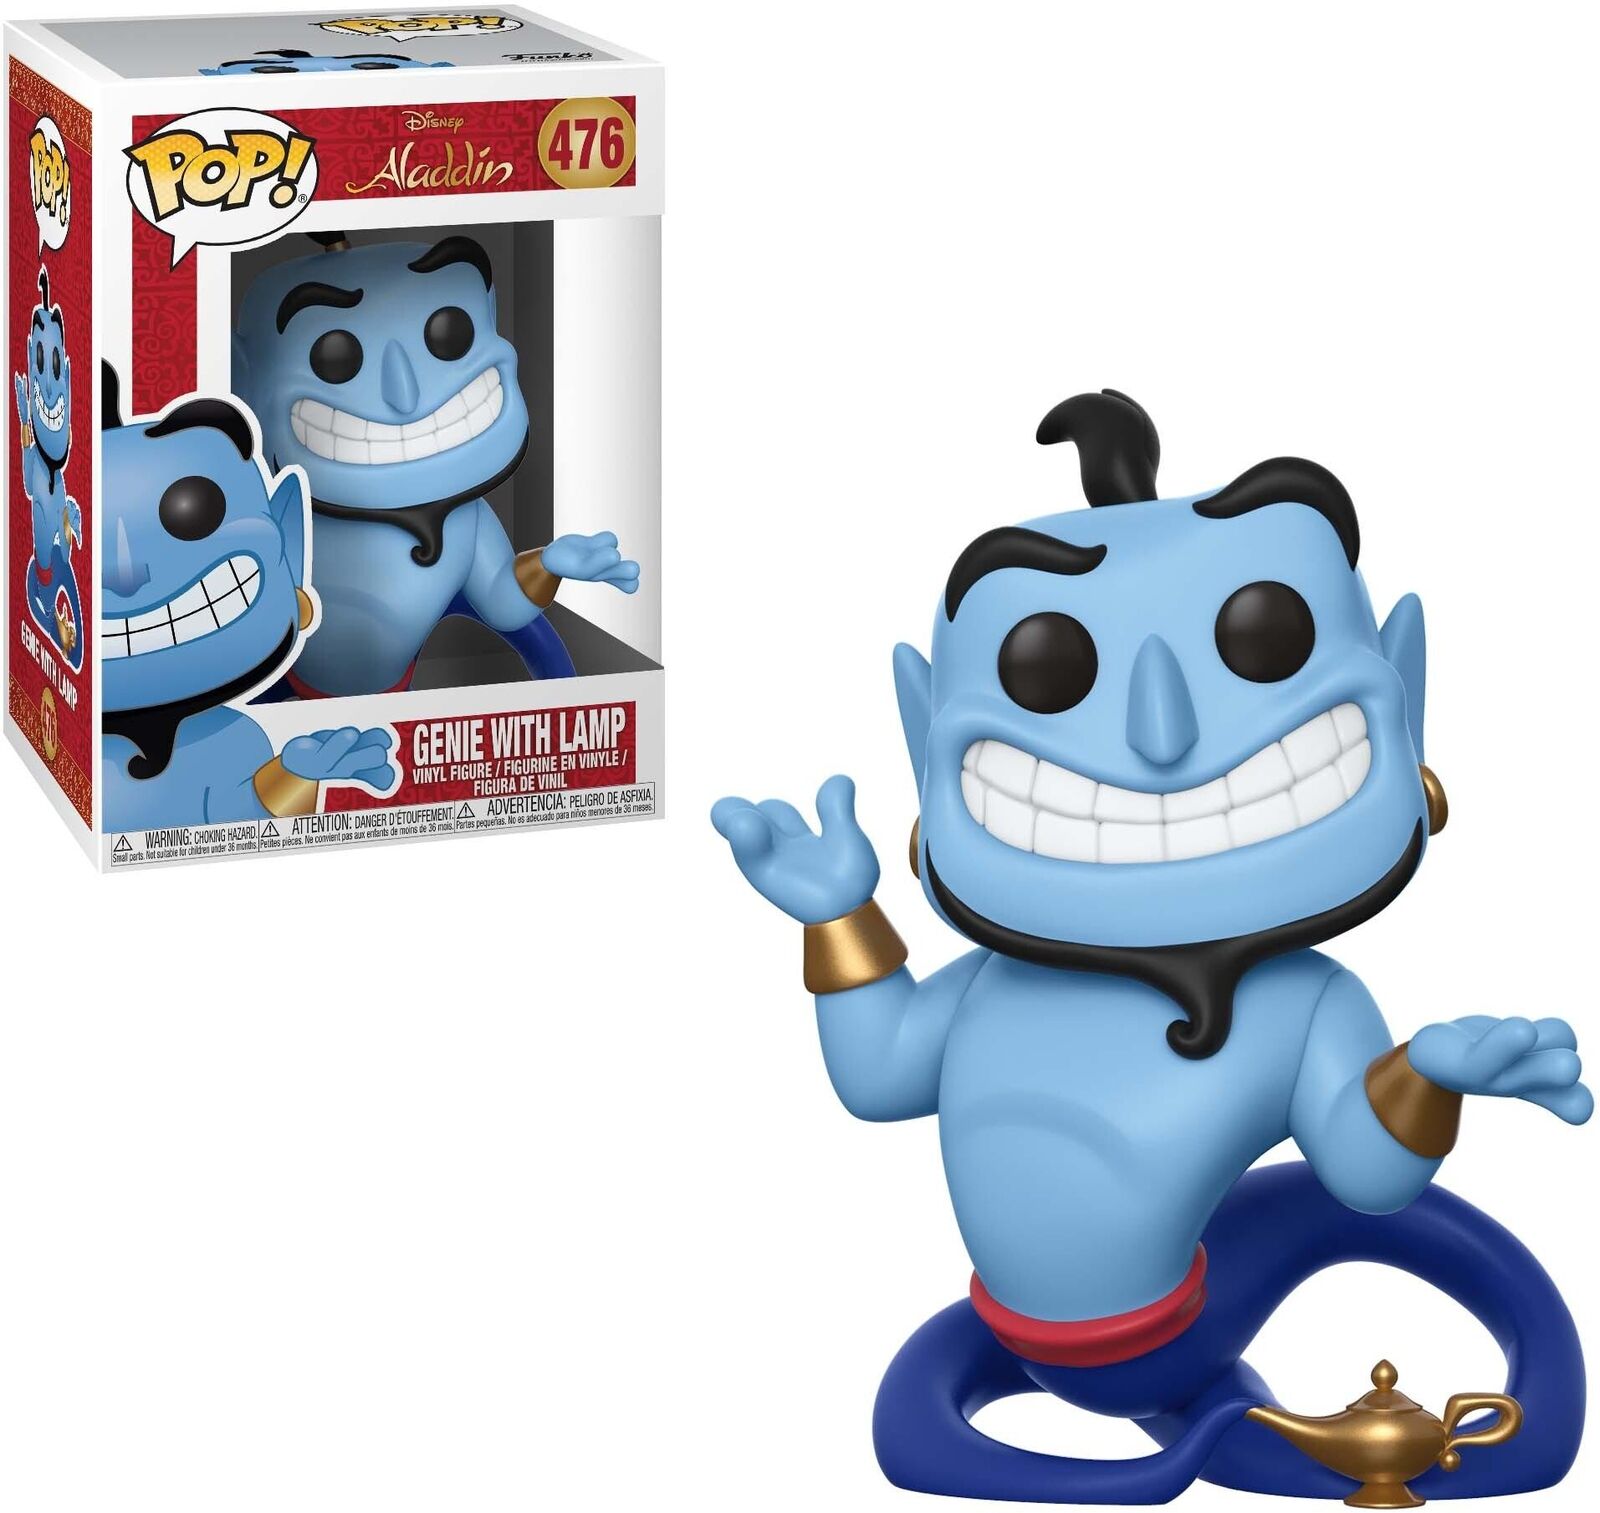 Aladdin Genie with Lamp - 476 – S & A Collectablez